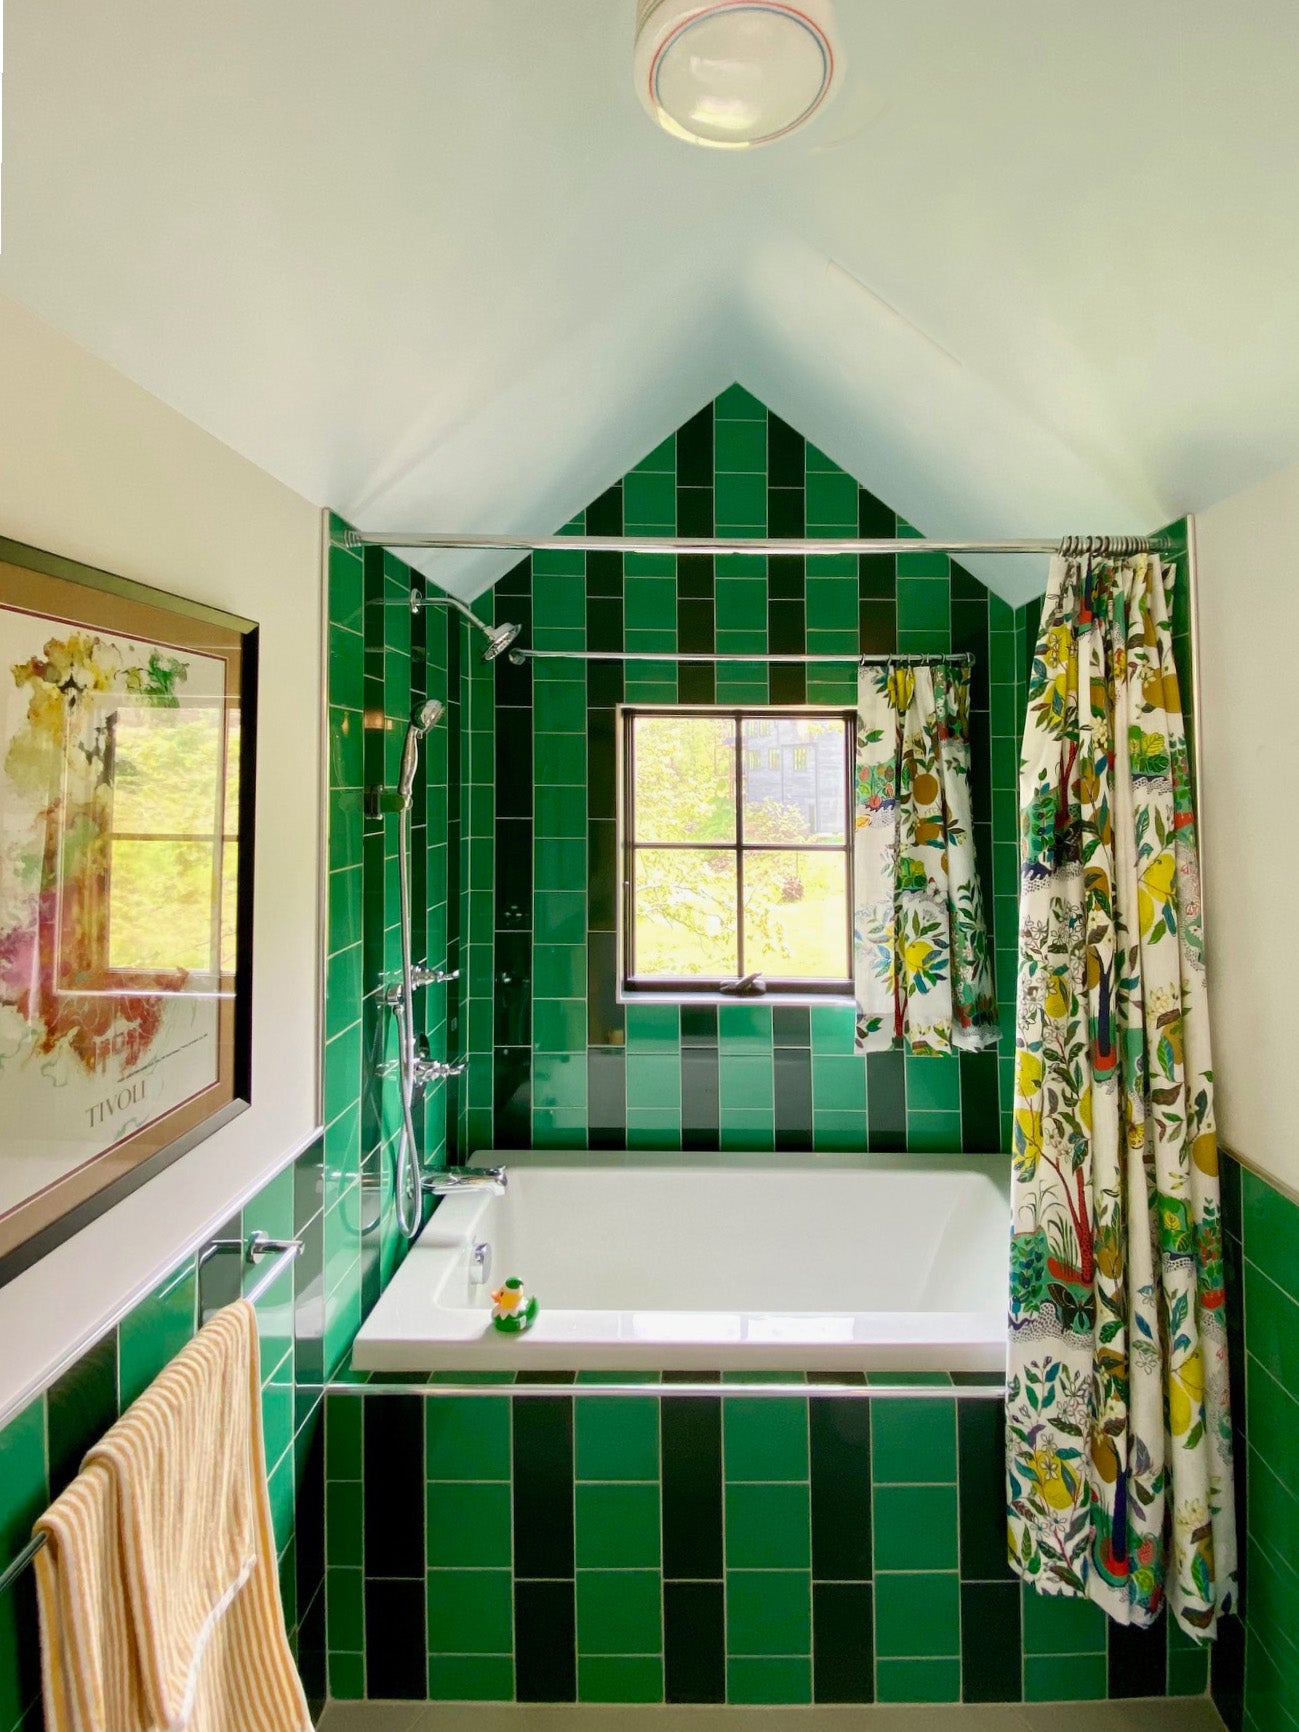 This Oregon Home Reinvents Rustic With Green Tile Stripes and Allover Rainbow Plaid